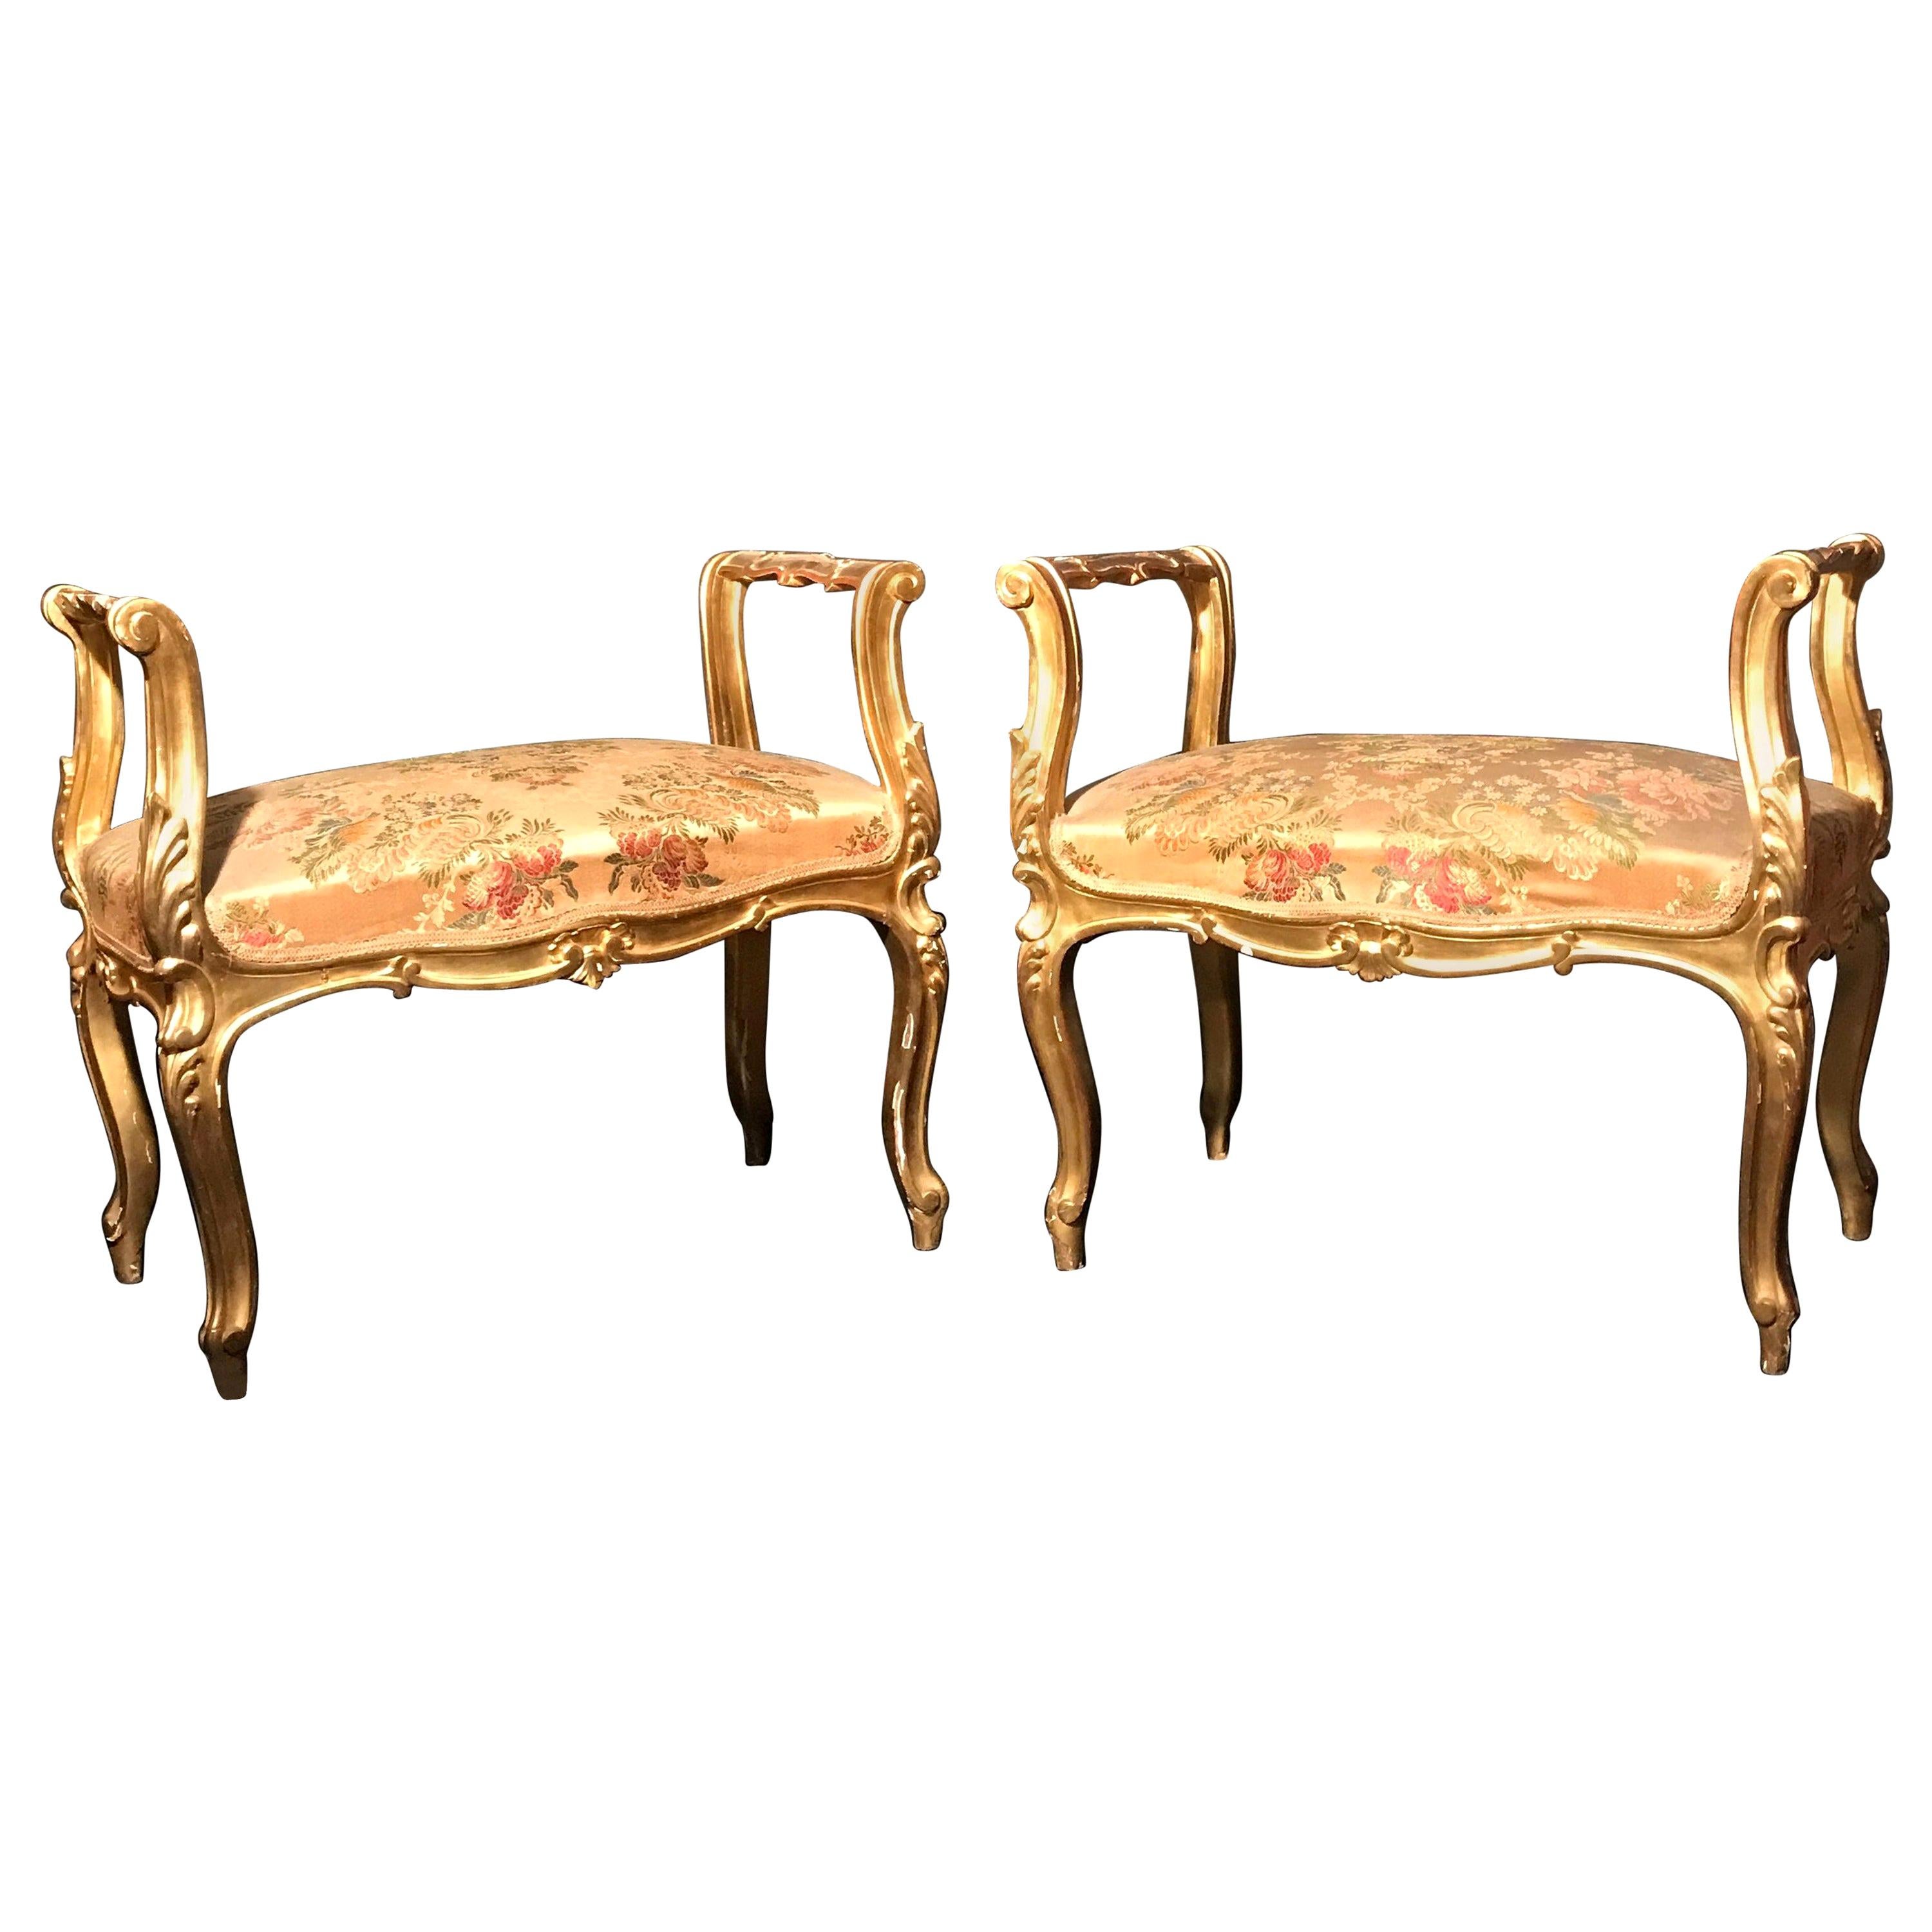 Pair of 19th Century Italian Gilt-Wood  Window Benches or Settees For Sale